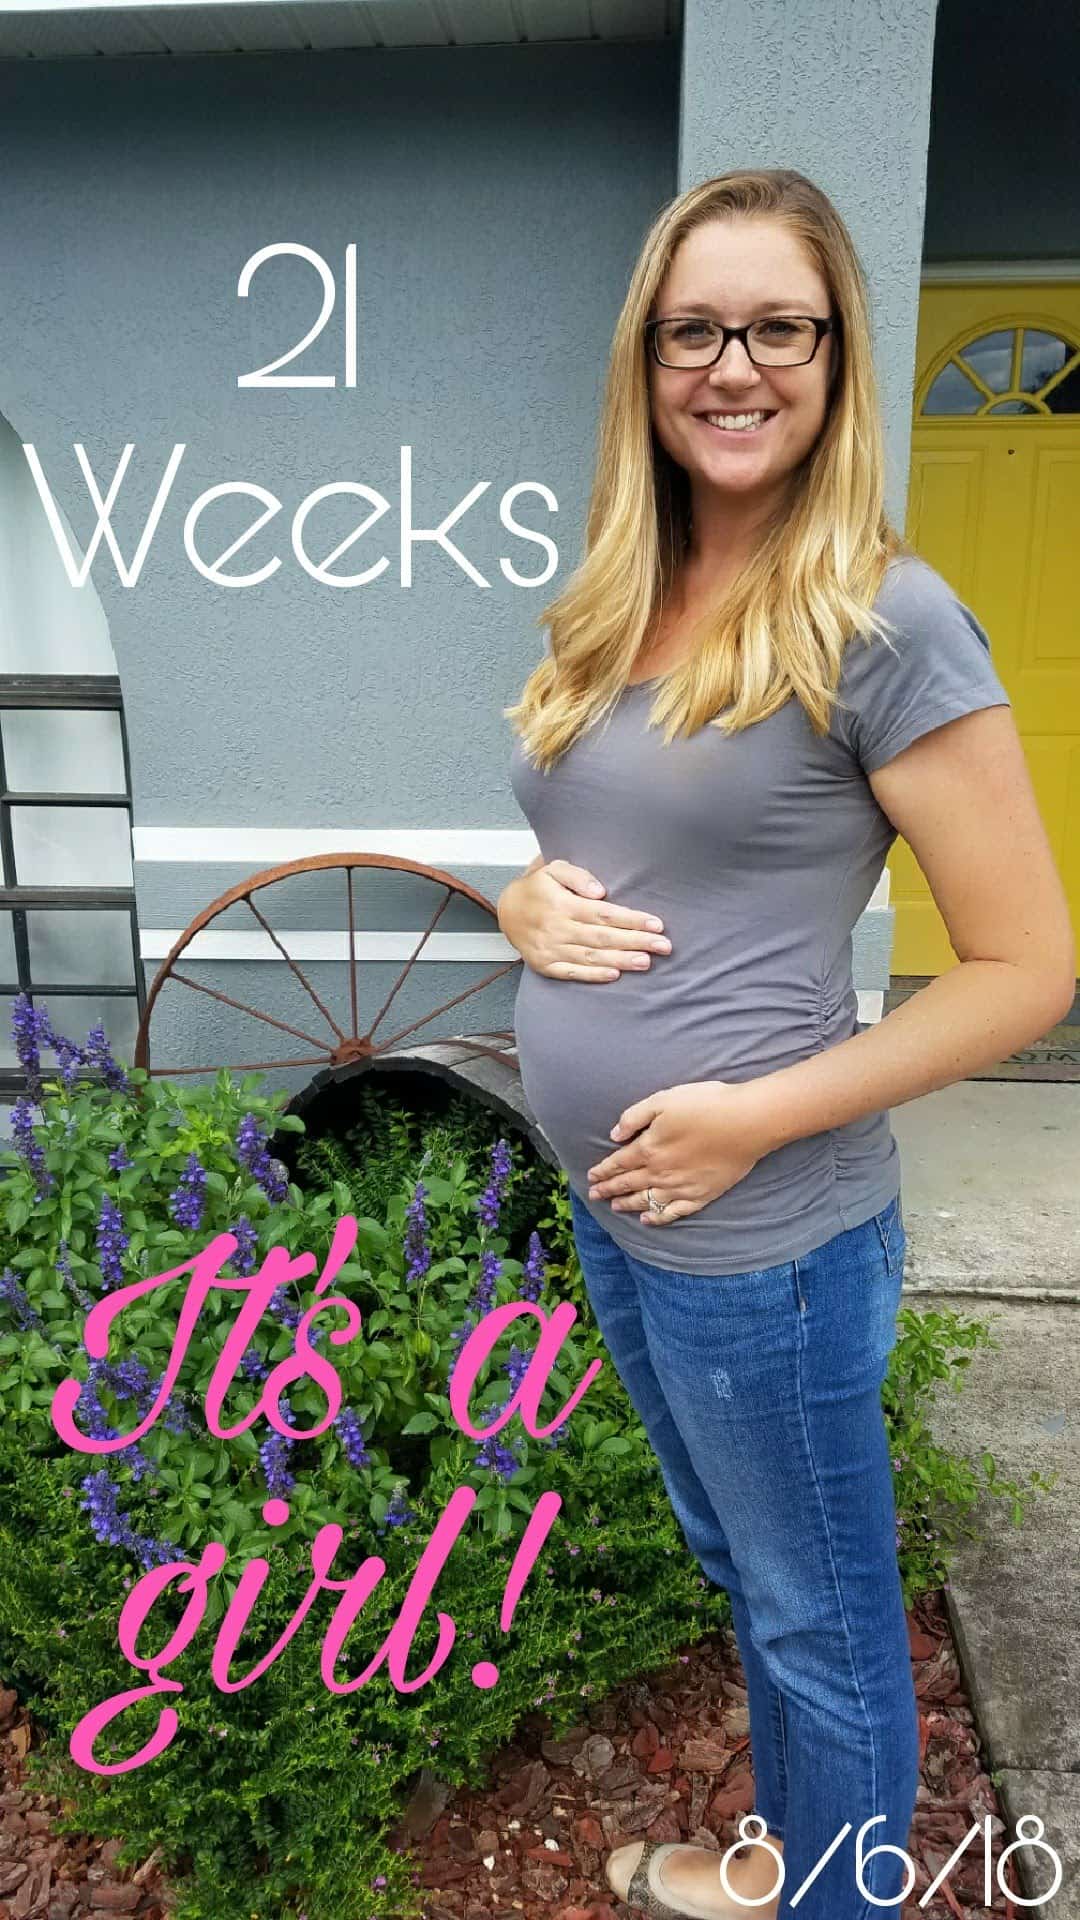 21 Weeks Pregnant. It's A Girl!